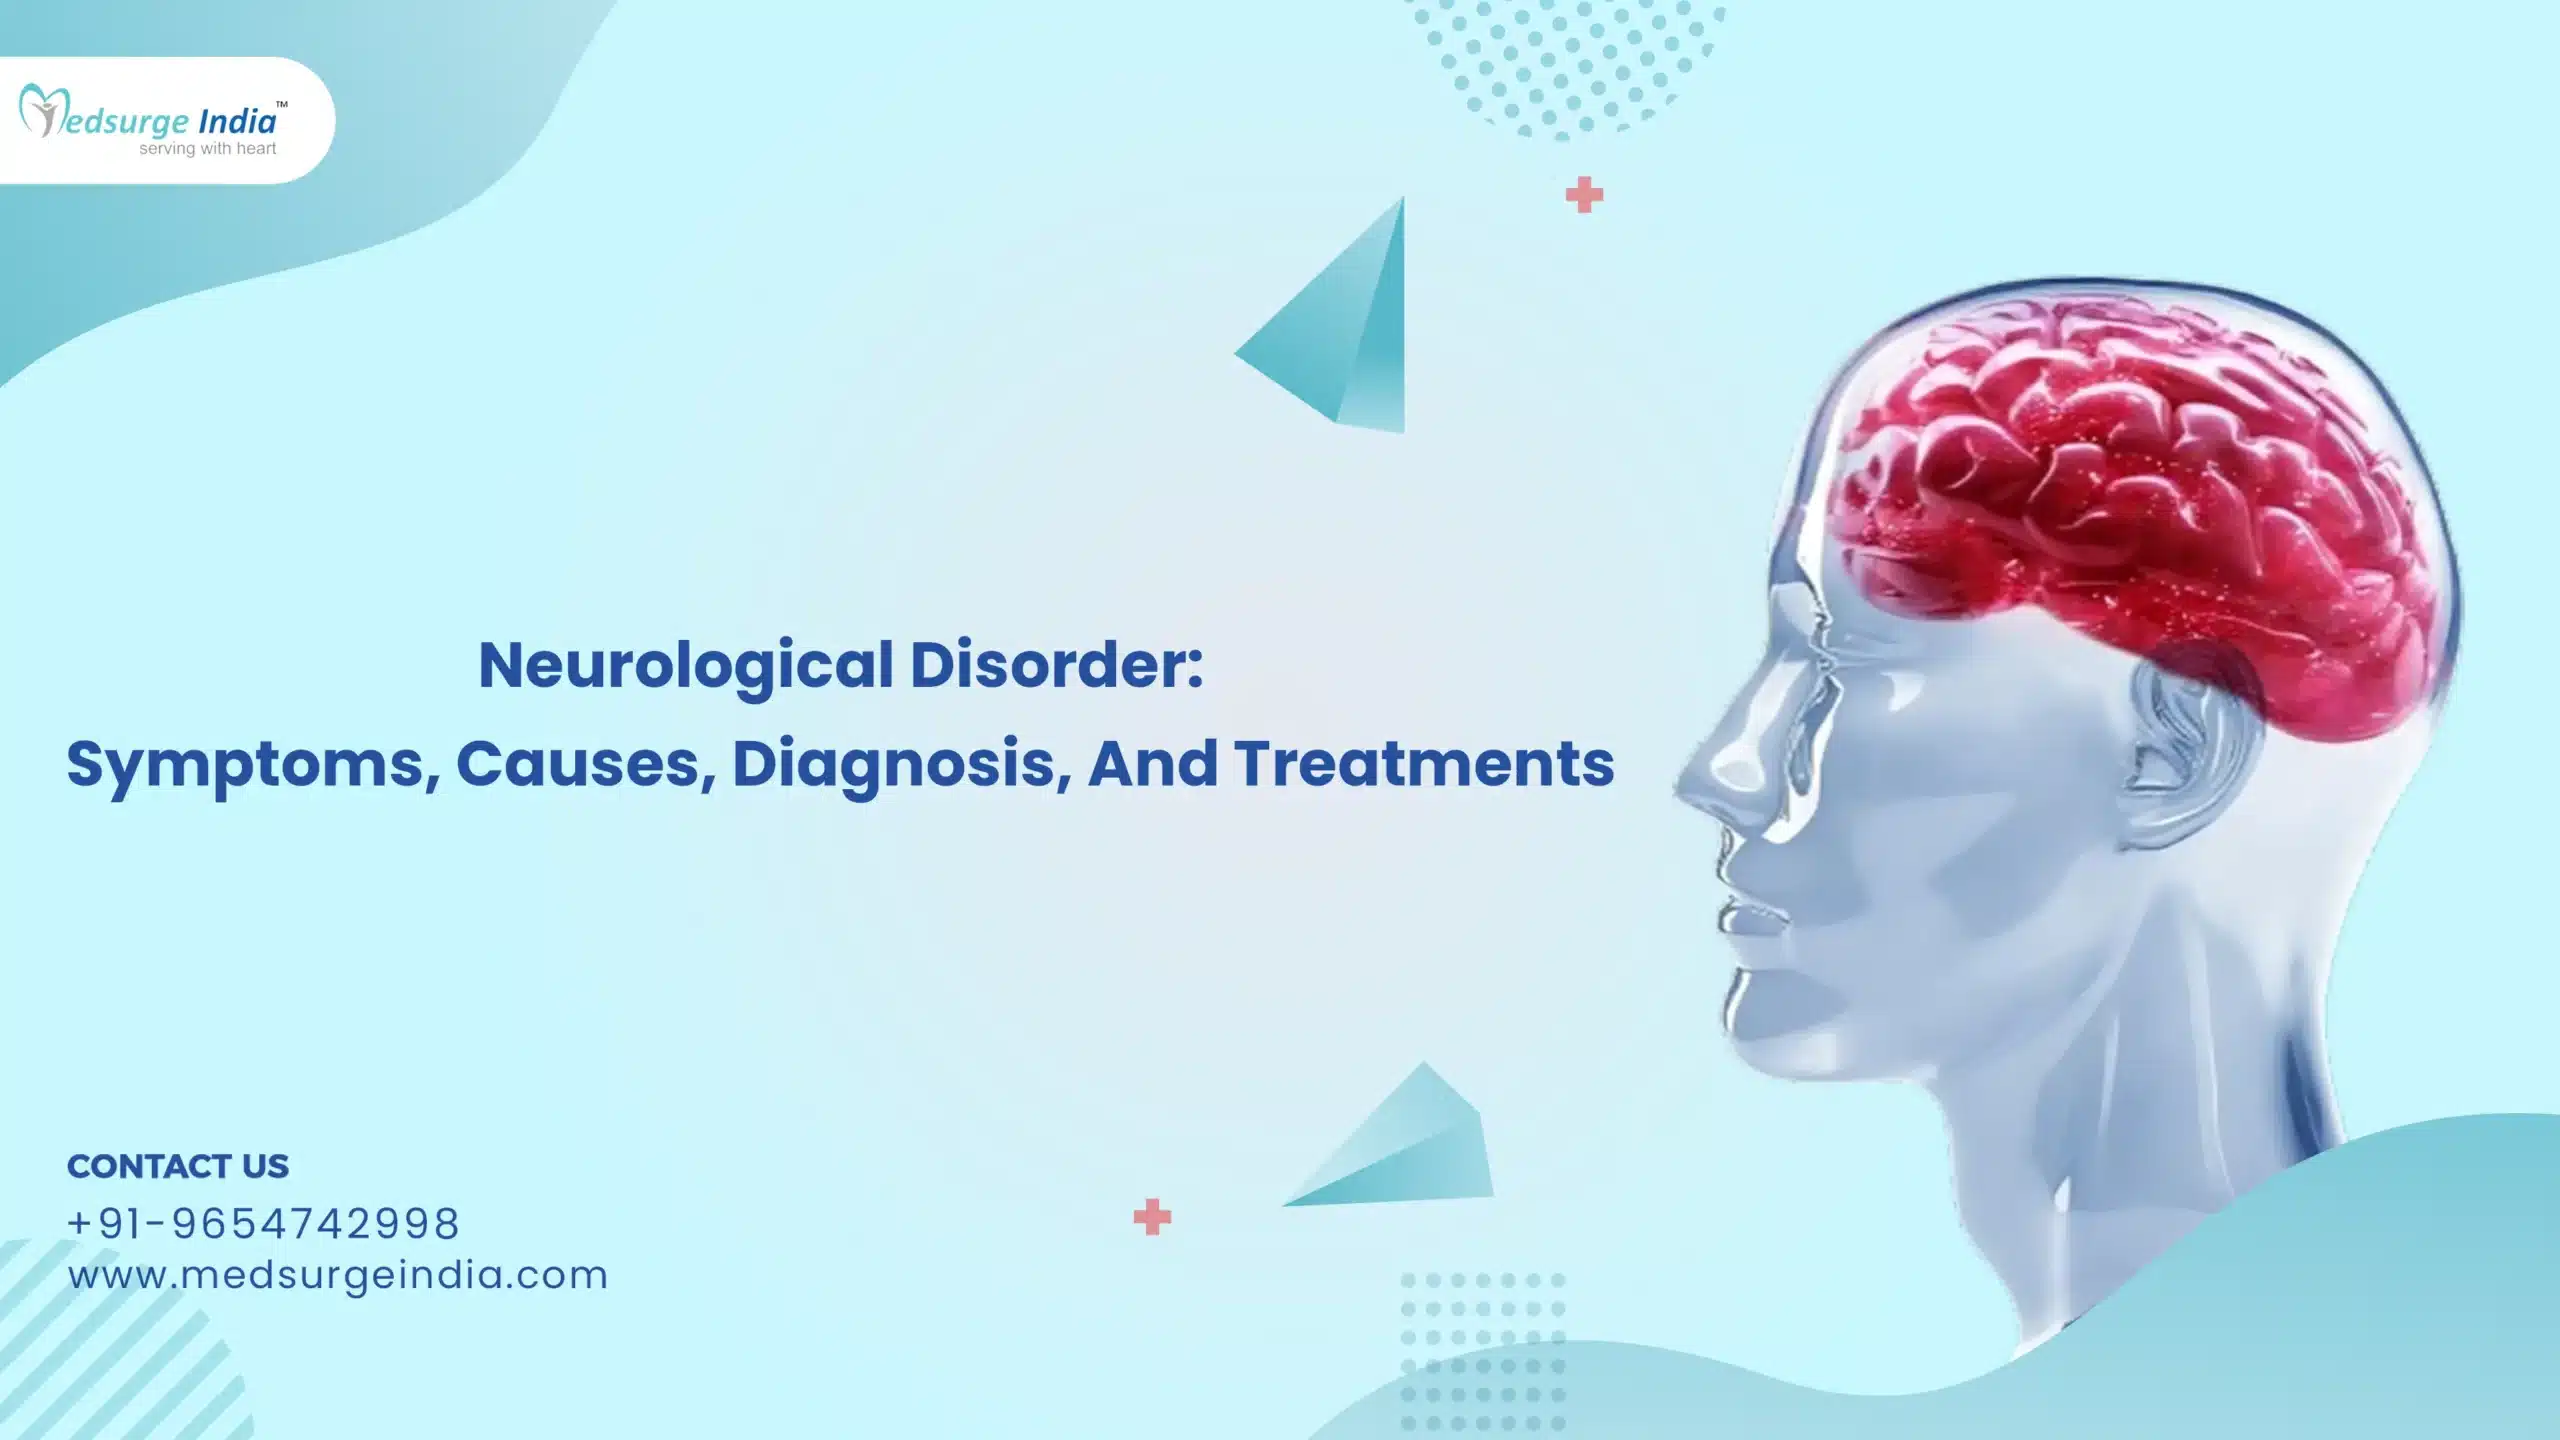 Neurological Disorder: Symptoms, Causes, Diagnosis, And Treatments